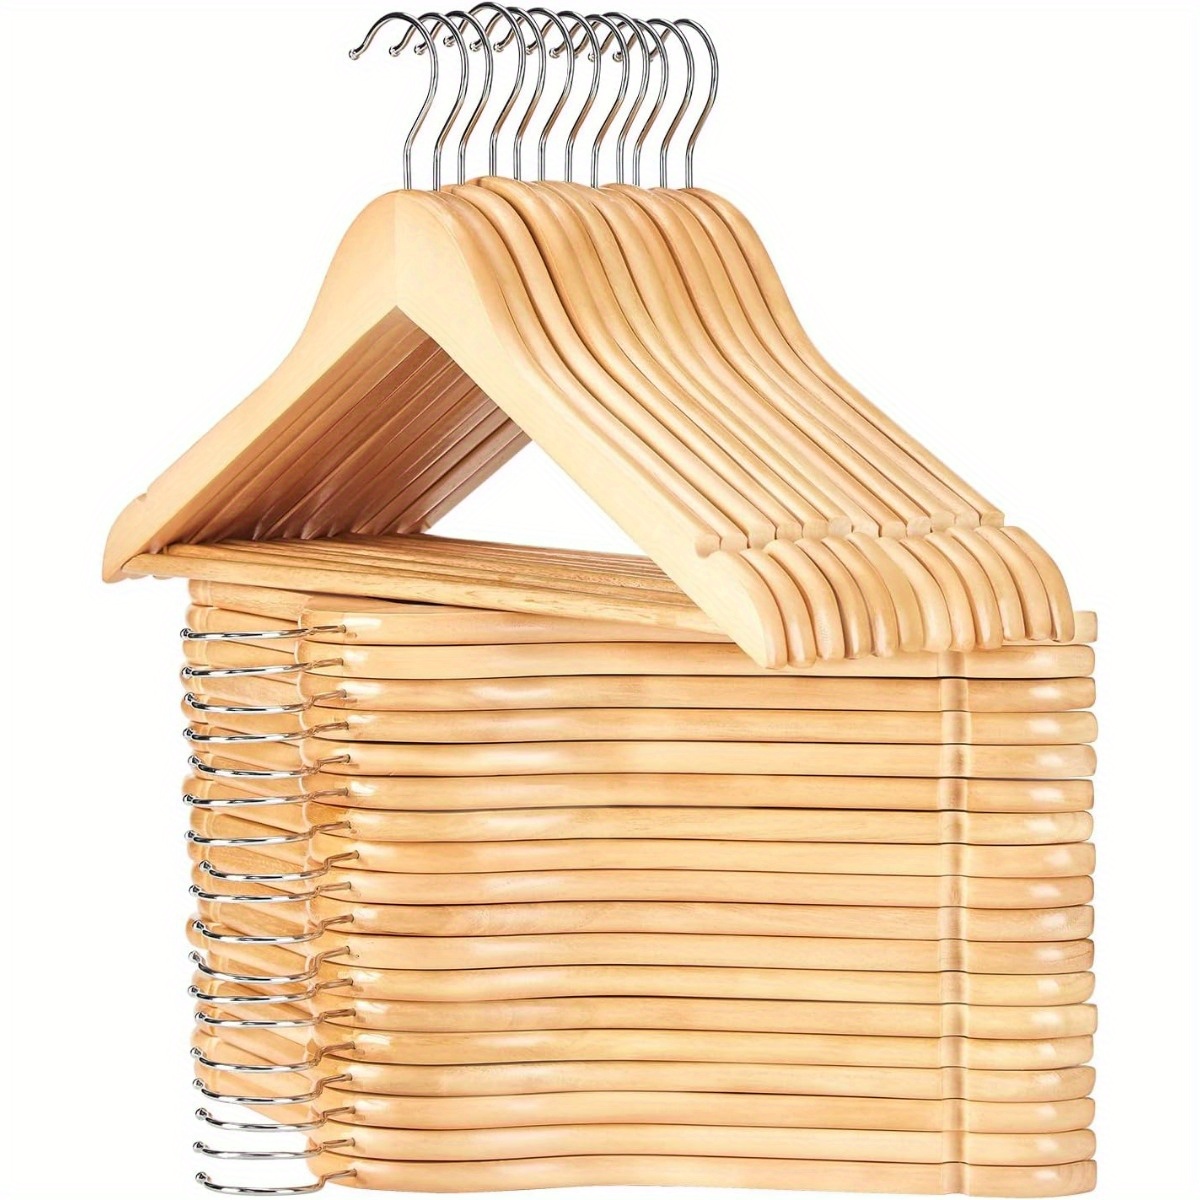 

Wooden Hangers Wooden Hangers With Non Slip Suit Hangers Coat Hangers Natural Finish Solid Clothes Hangers With 360 Swivel Hook For Dress Shirts Jackets Pants